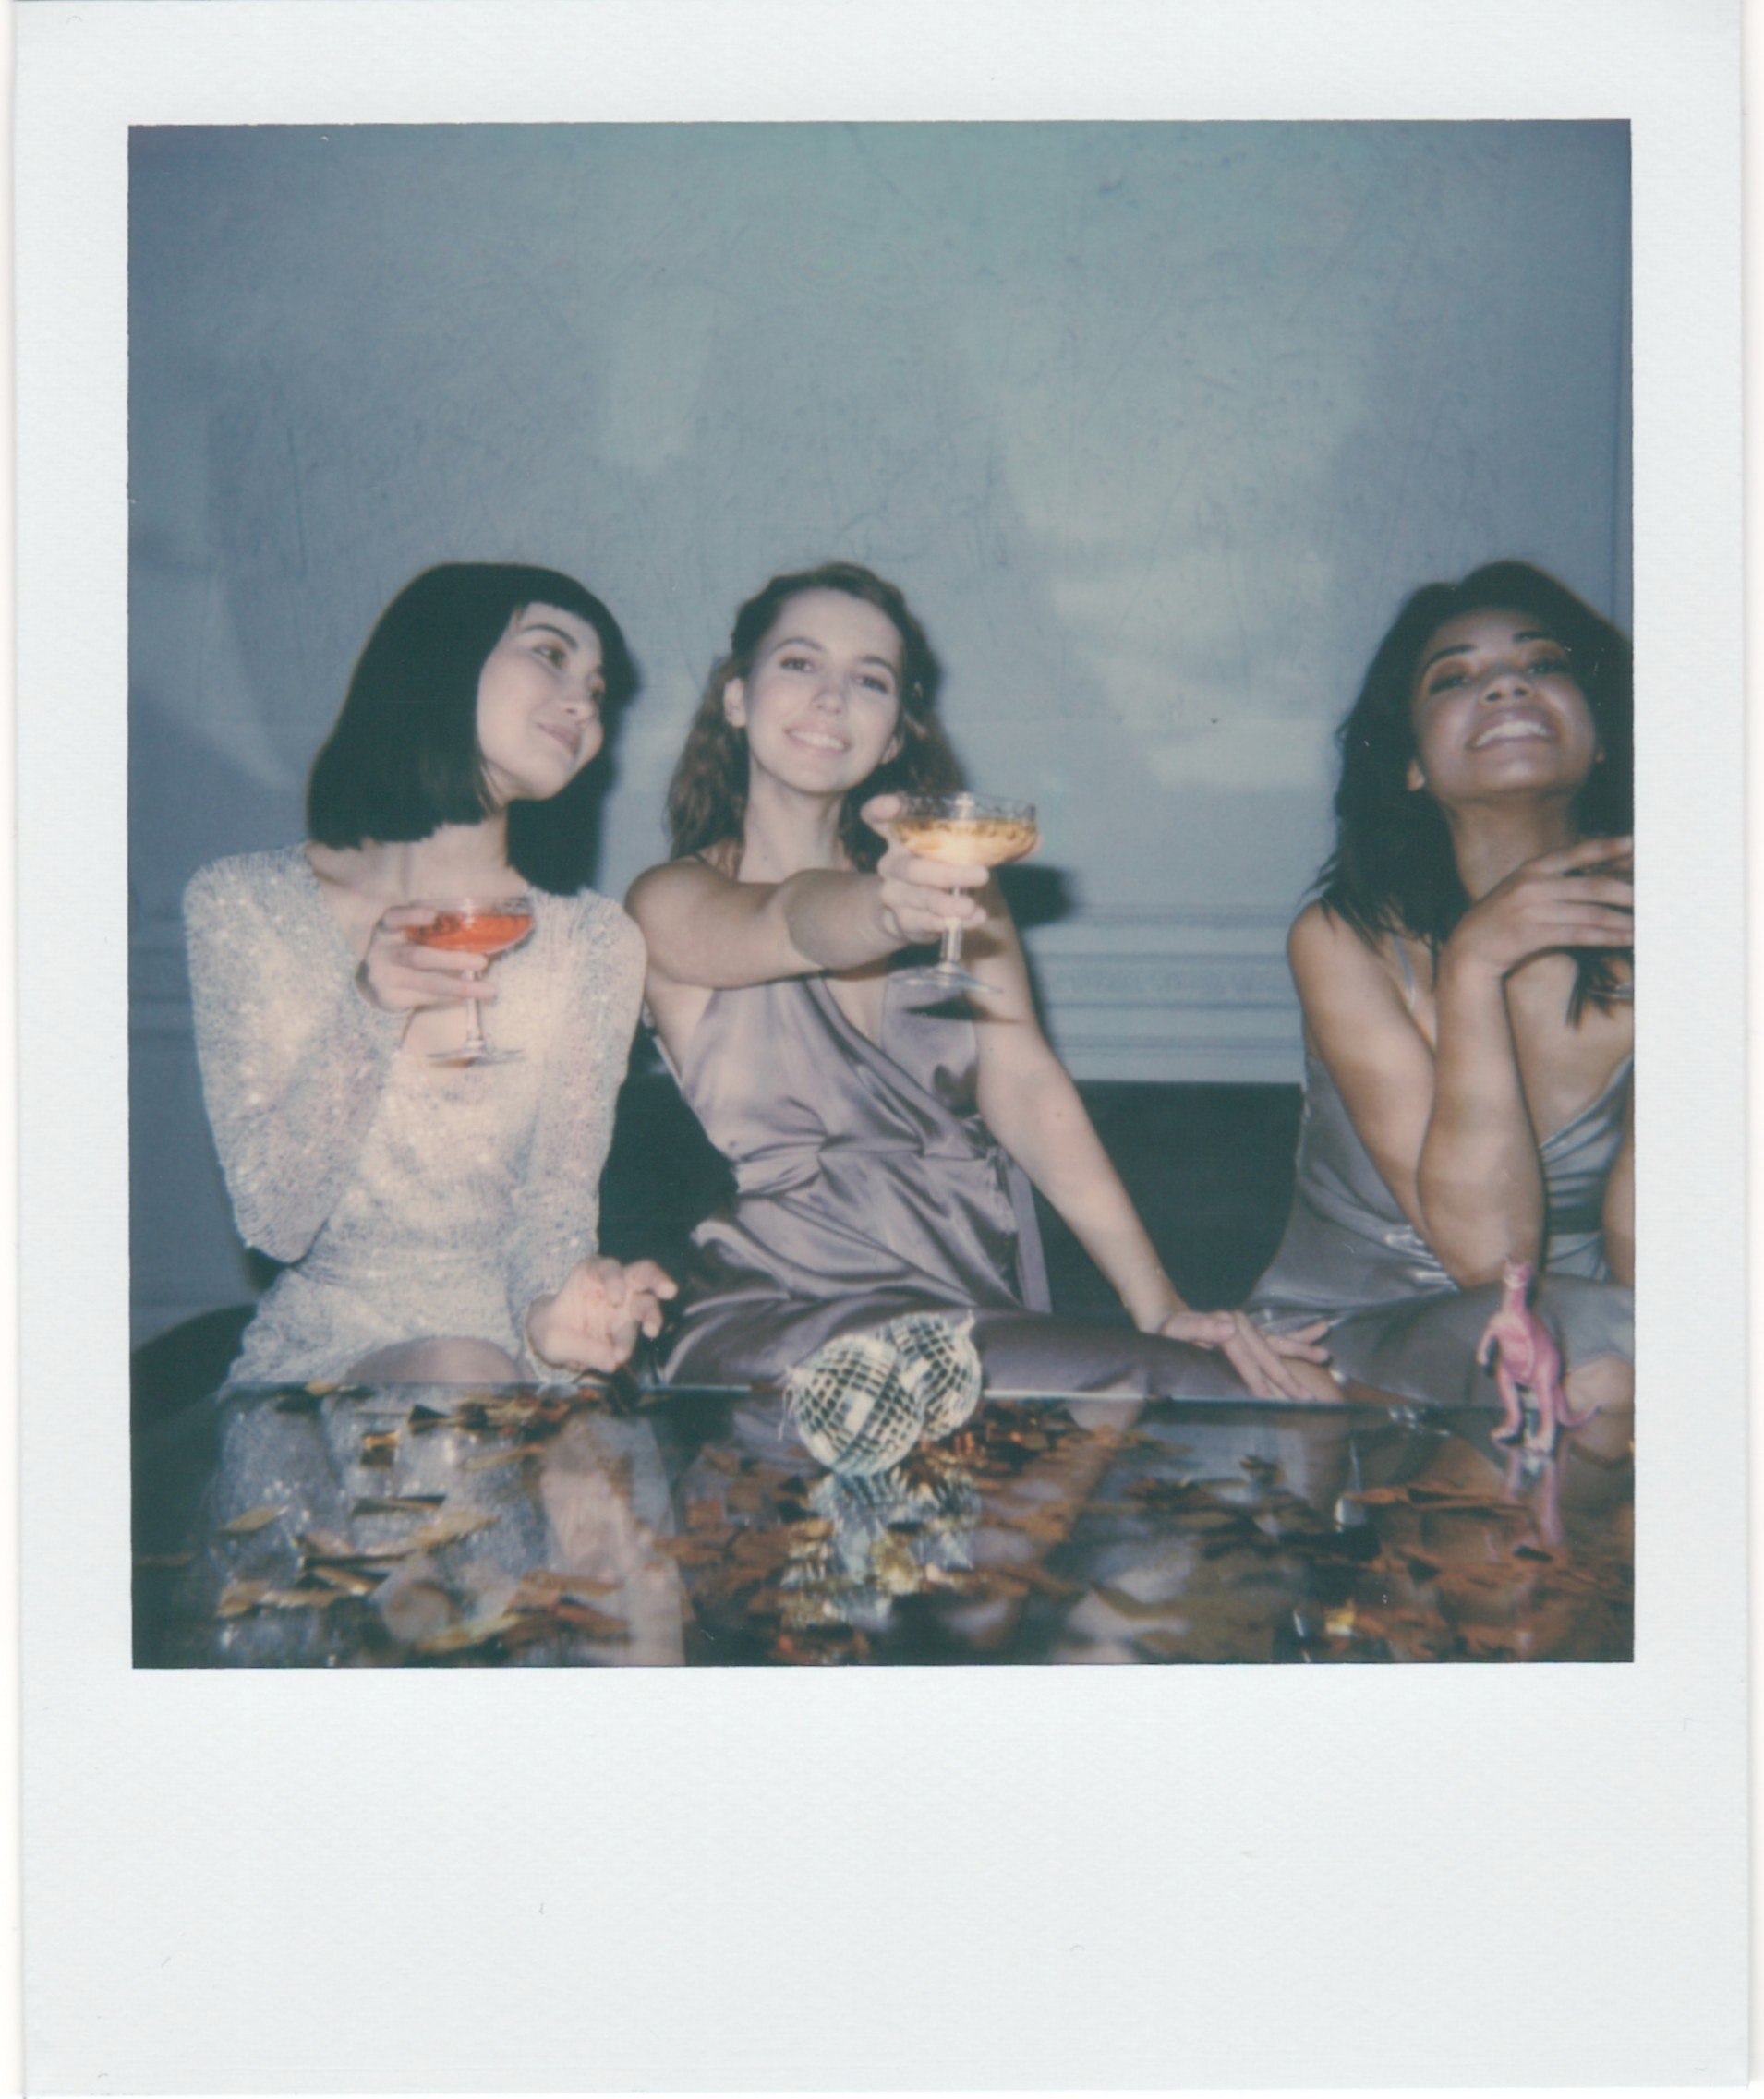 Pictured - Three young women drinking | Source: Pexels 